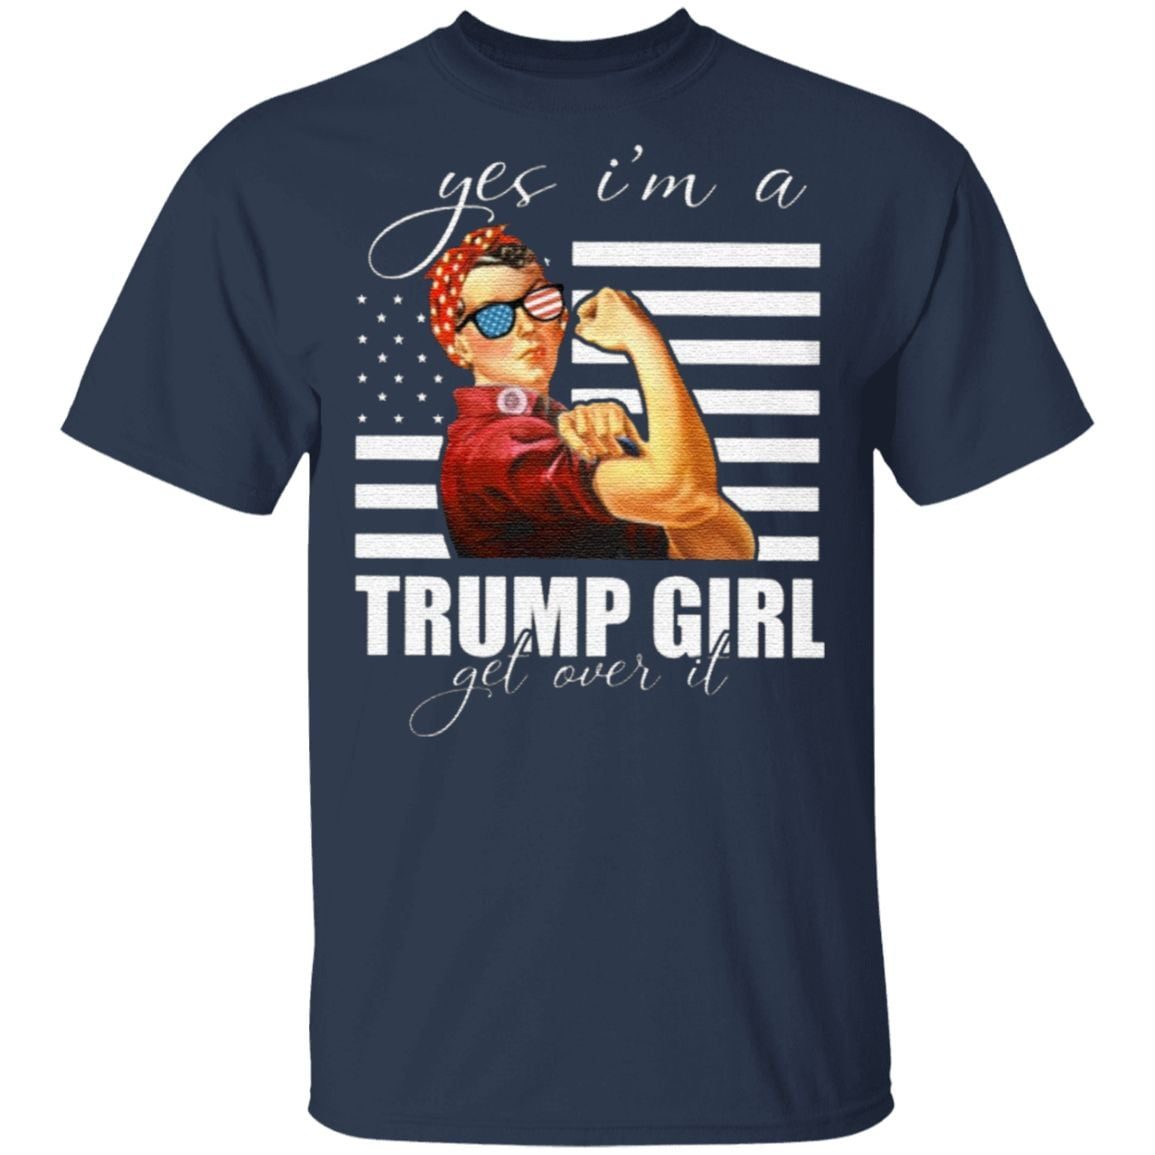 Yes I Am A Trump Girl Get Over It T Shirt